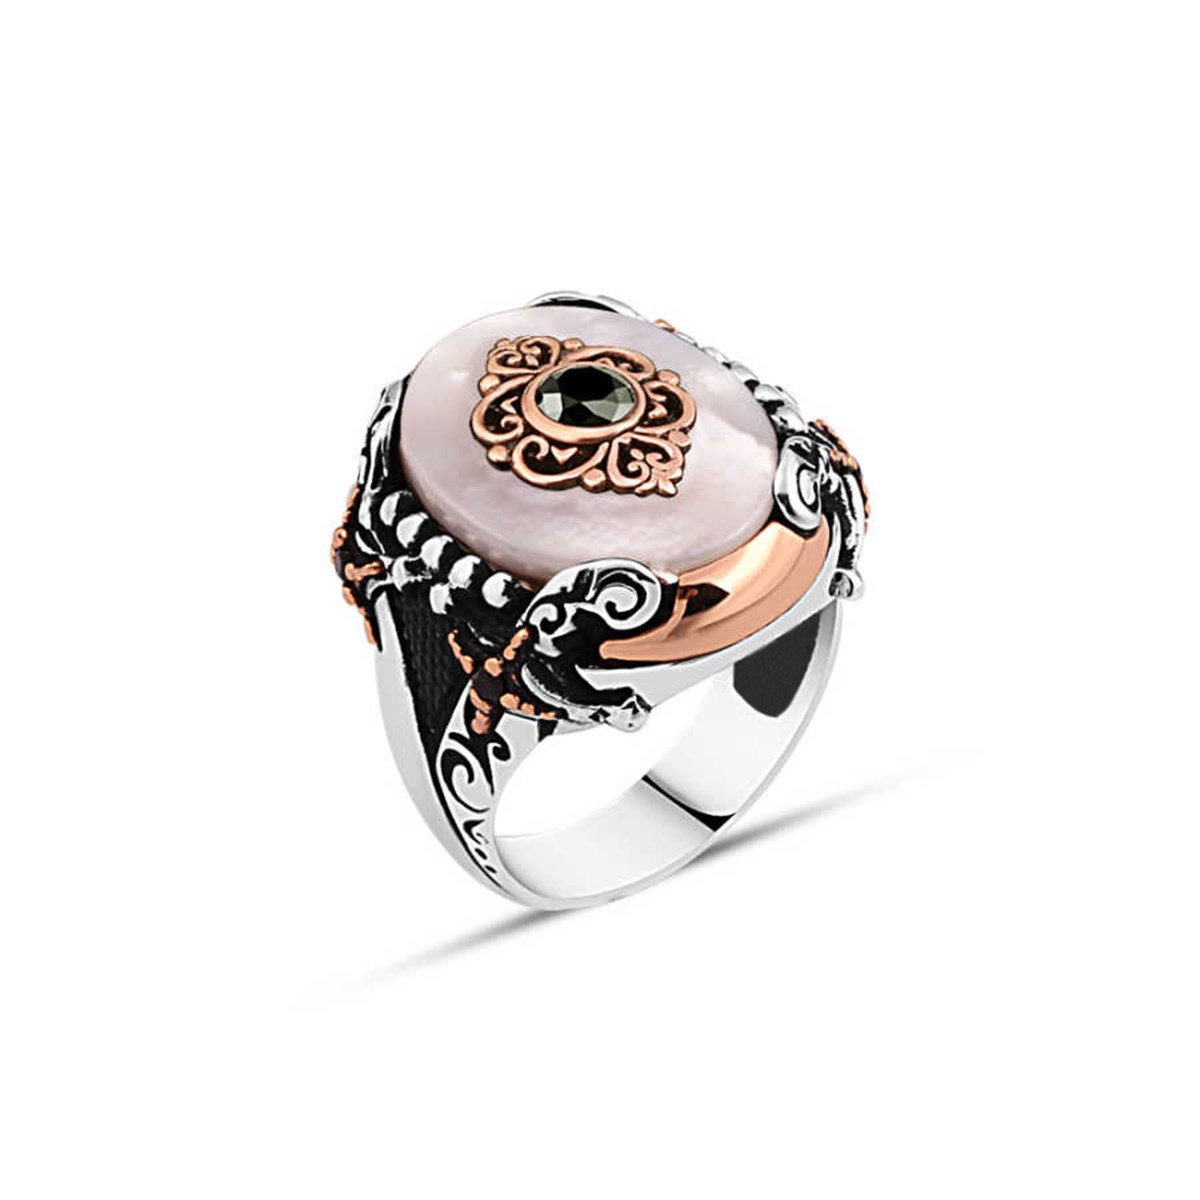 Sterling Silver Men's Ring with Pearl Stone and Zircon Stone on the Edge